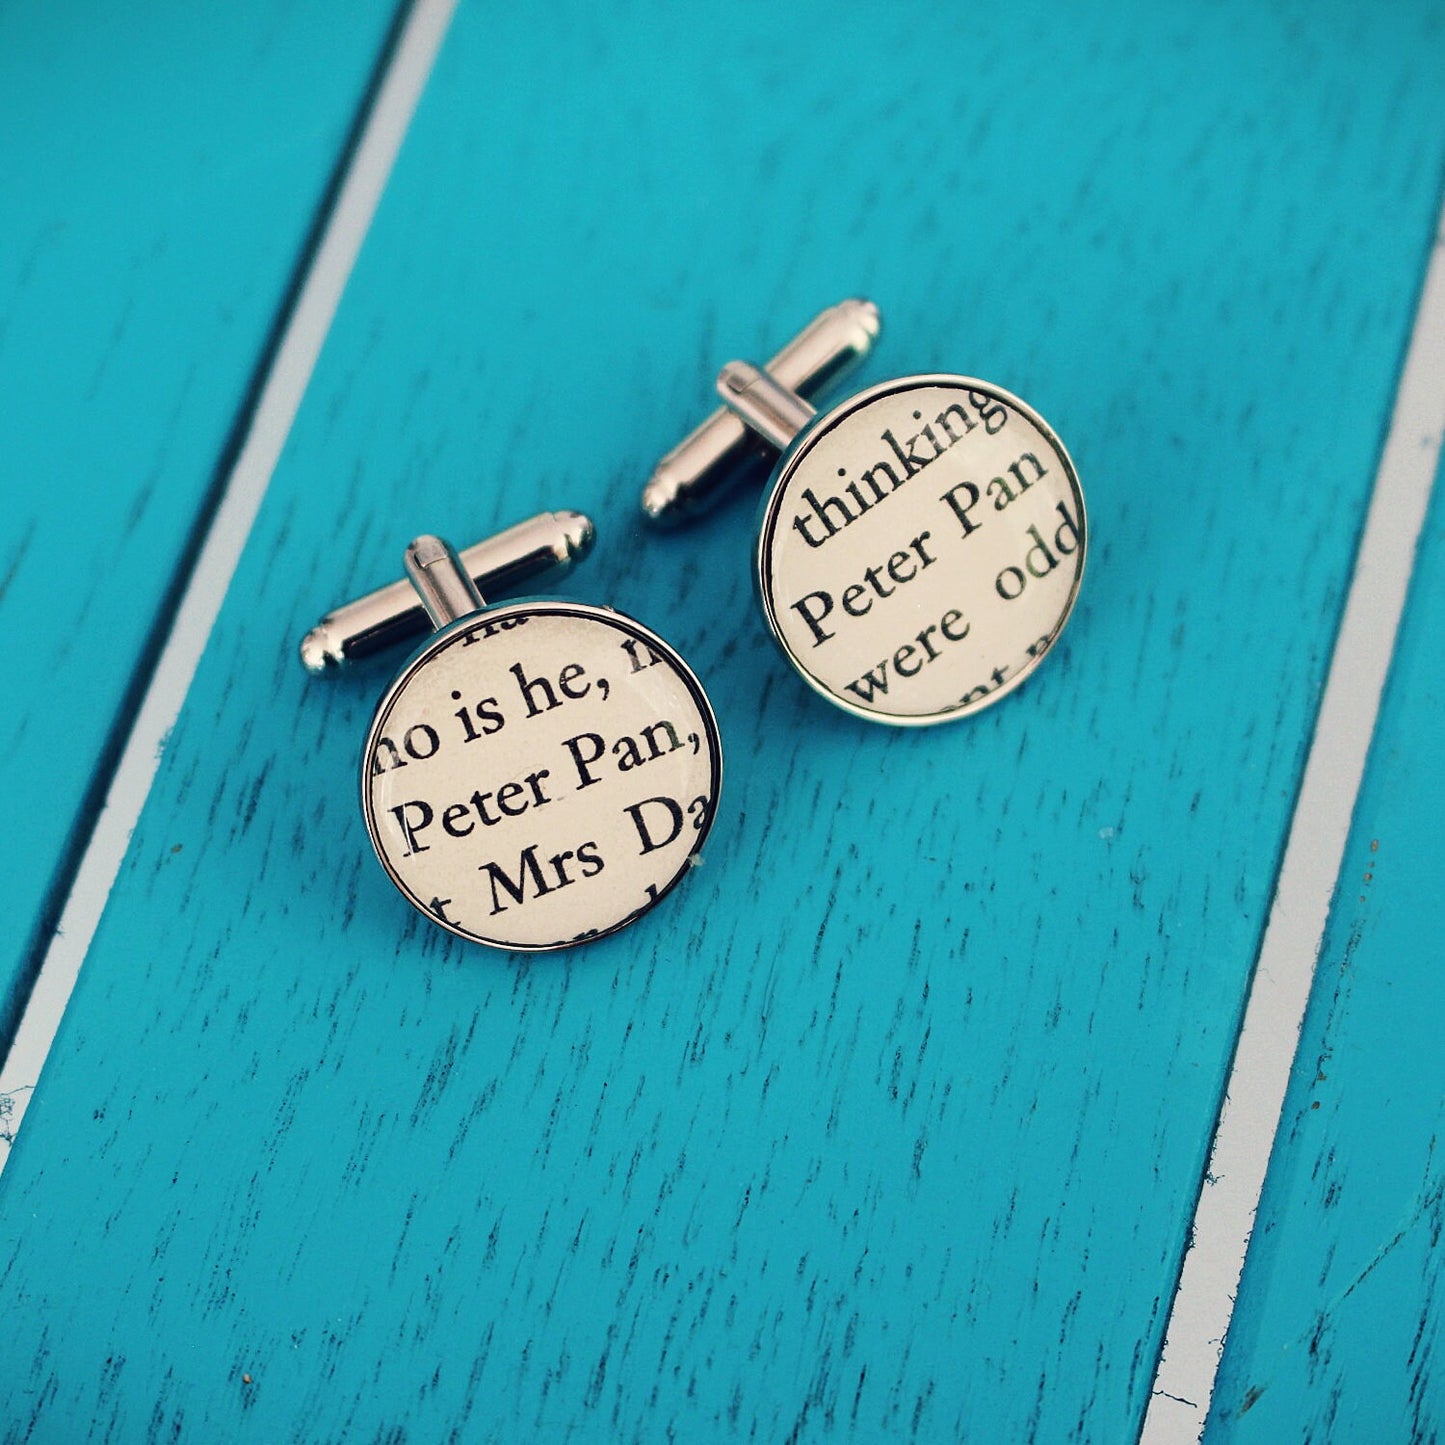 Peter Pan recycled book page cufflinks. Upcycled gift. Captain Hook. Lost Boys. Neverland. Vintage book. Wedding cufflinks. Groomsmen. Dad